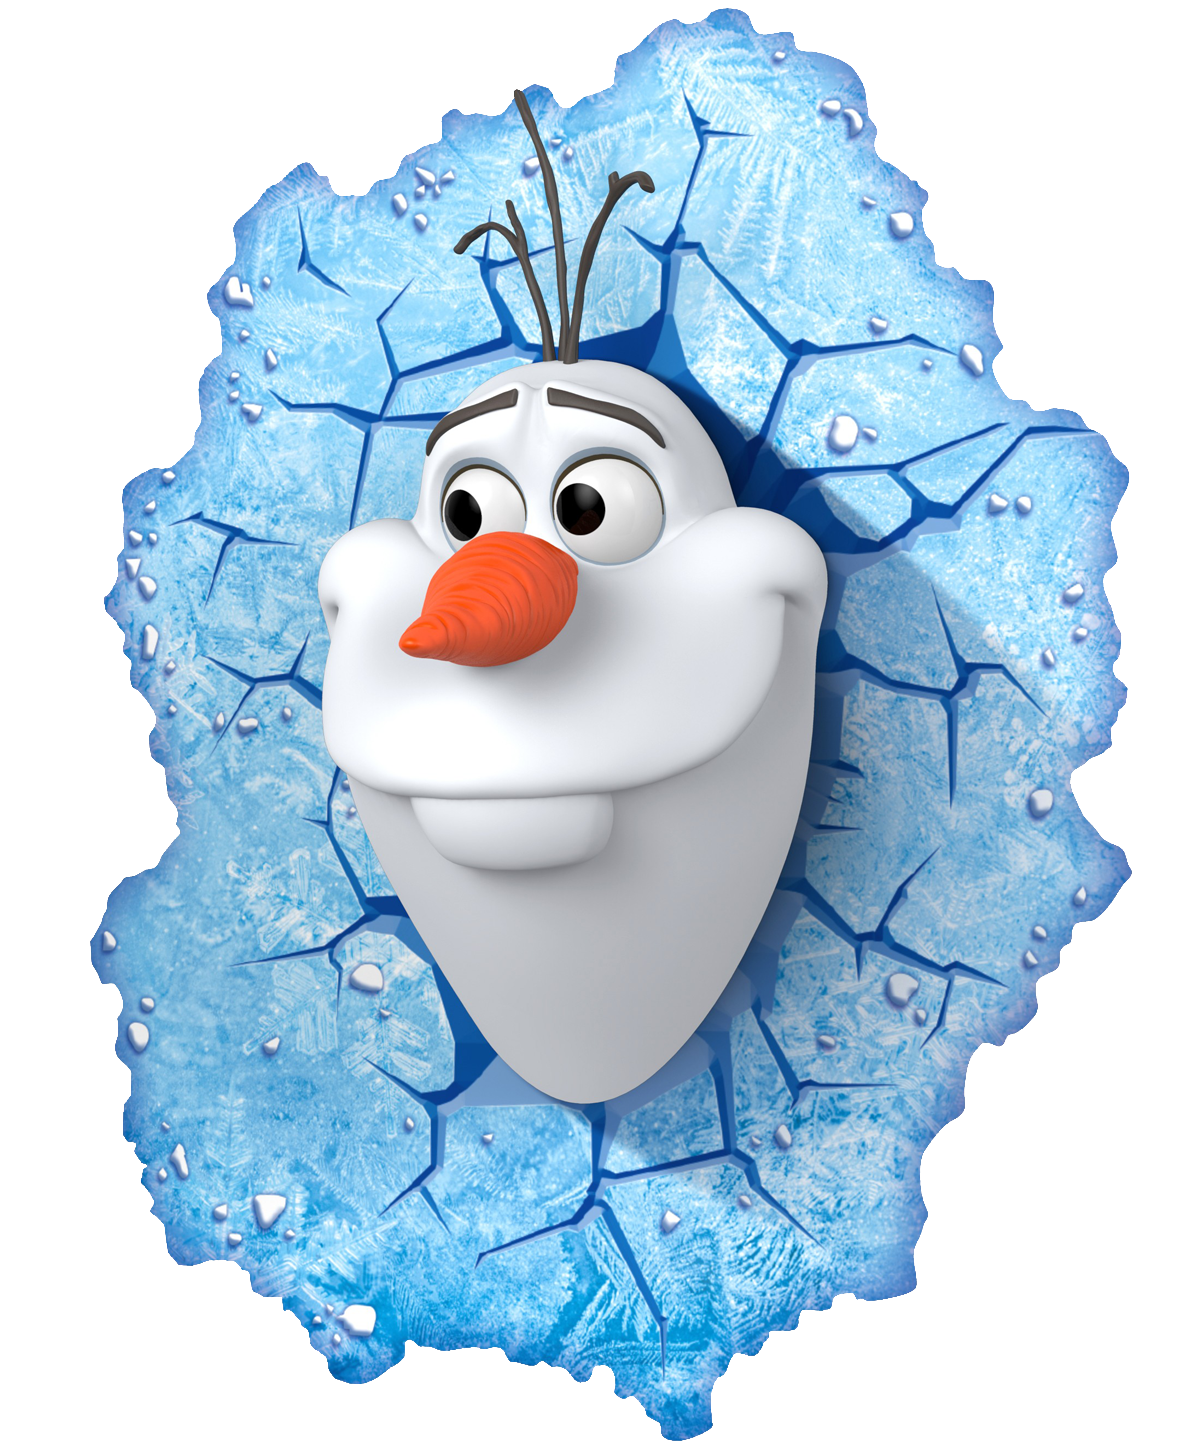 Download Frozen Olaf Picture Hq Png Image Freepngimg